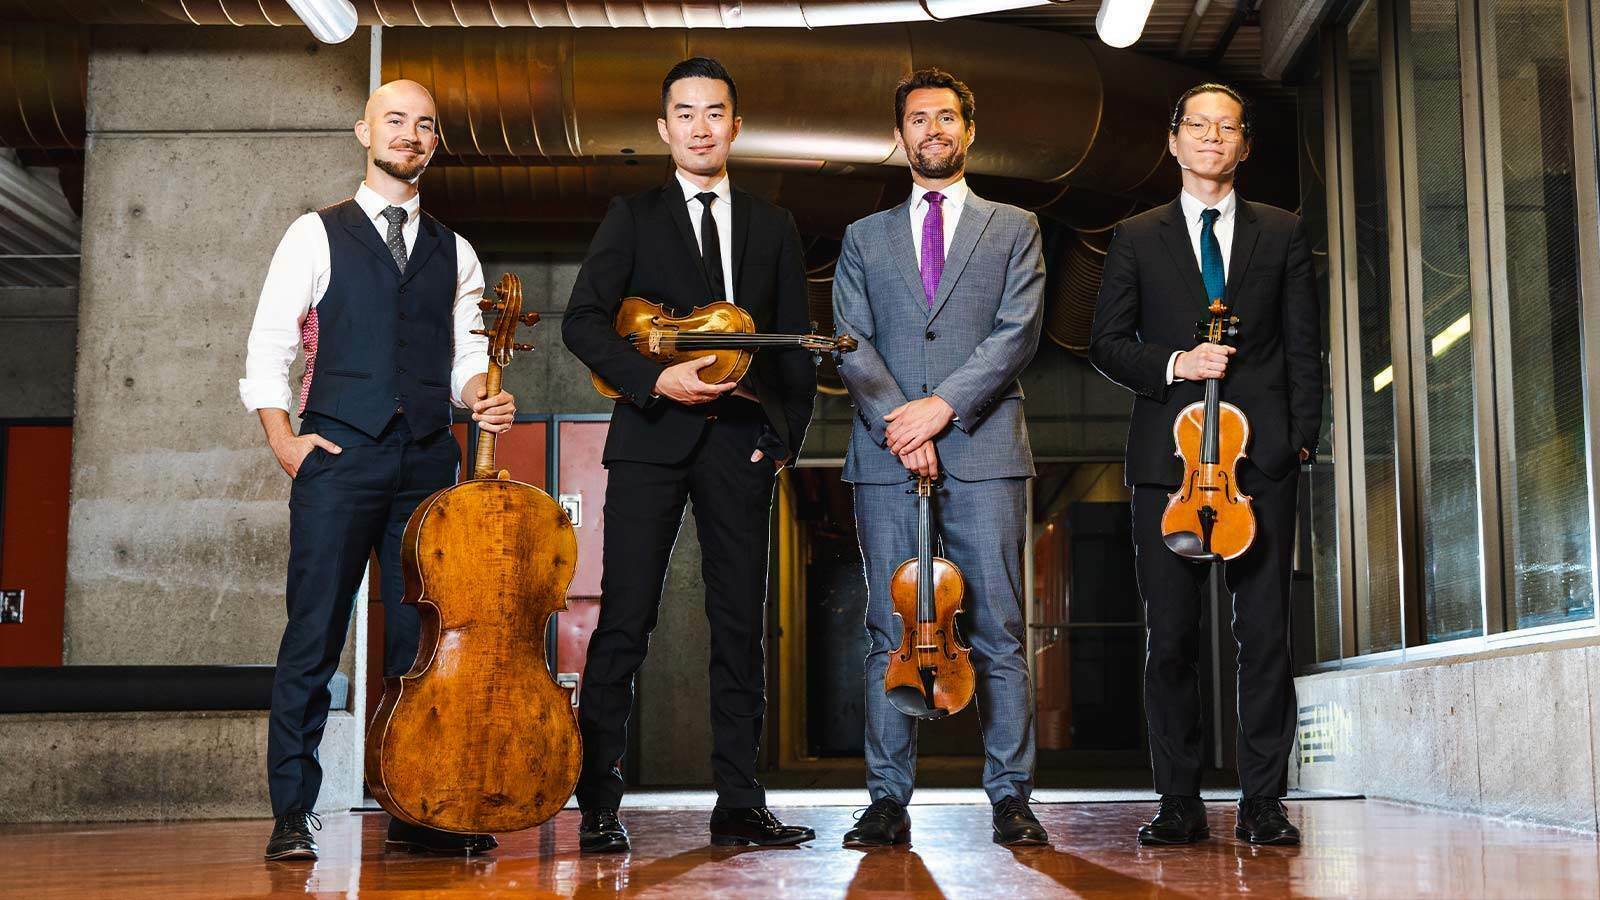 Dover Quartet named one of the greatest string quartets of the last 100 years by BBC Music Magazine, Livermore, California, United States